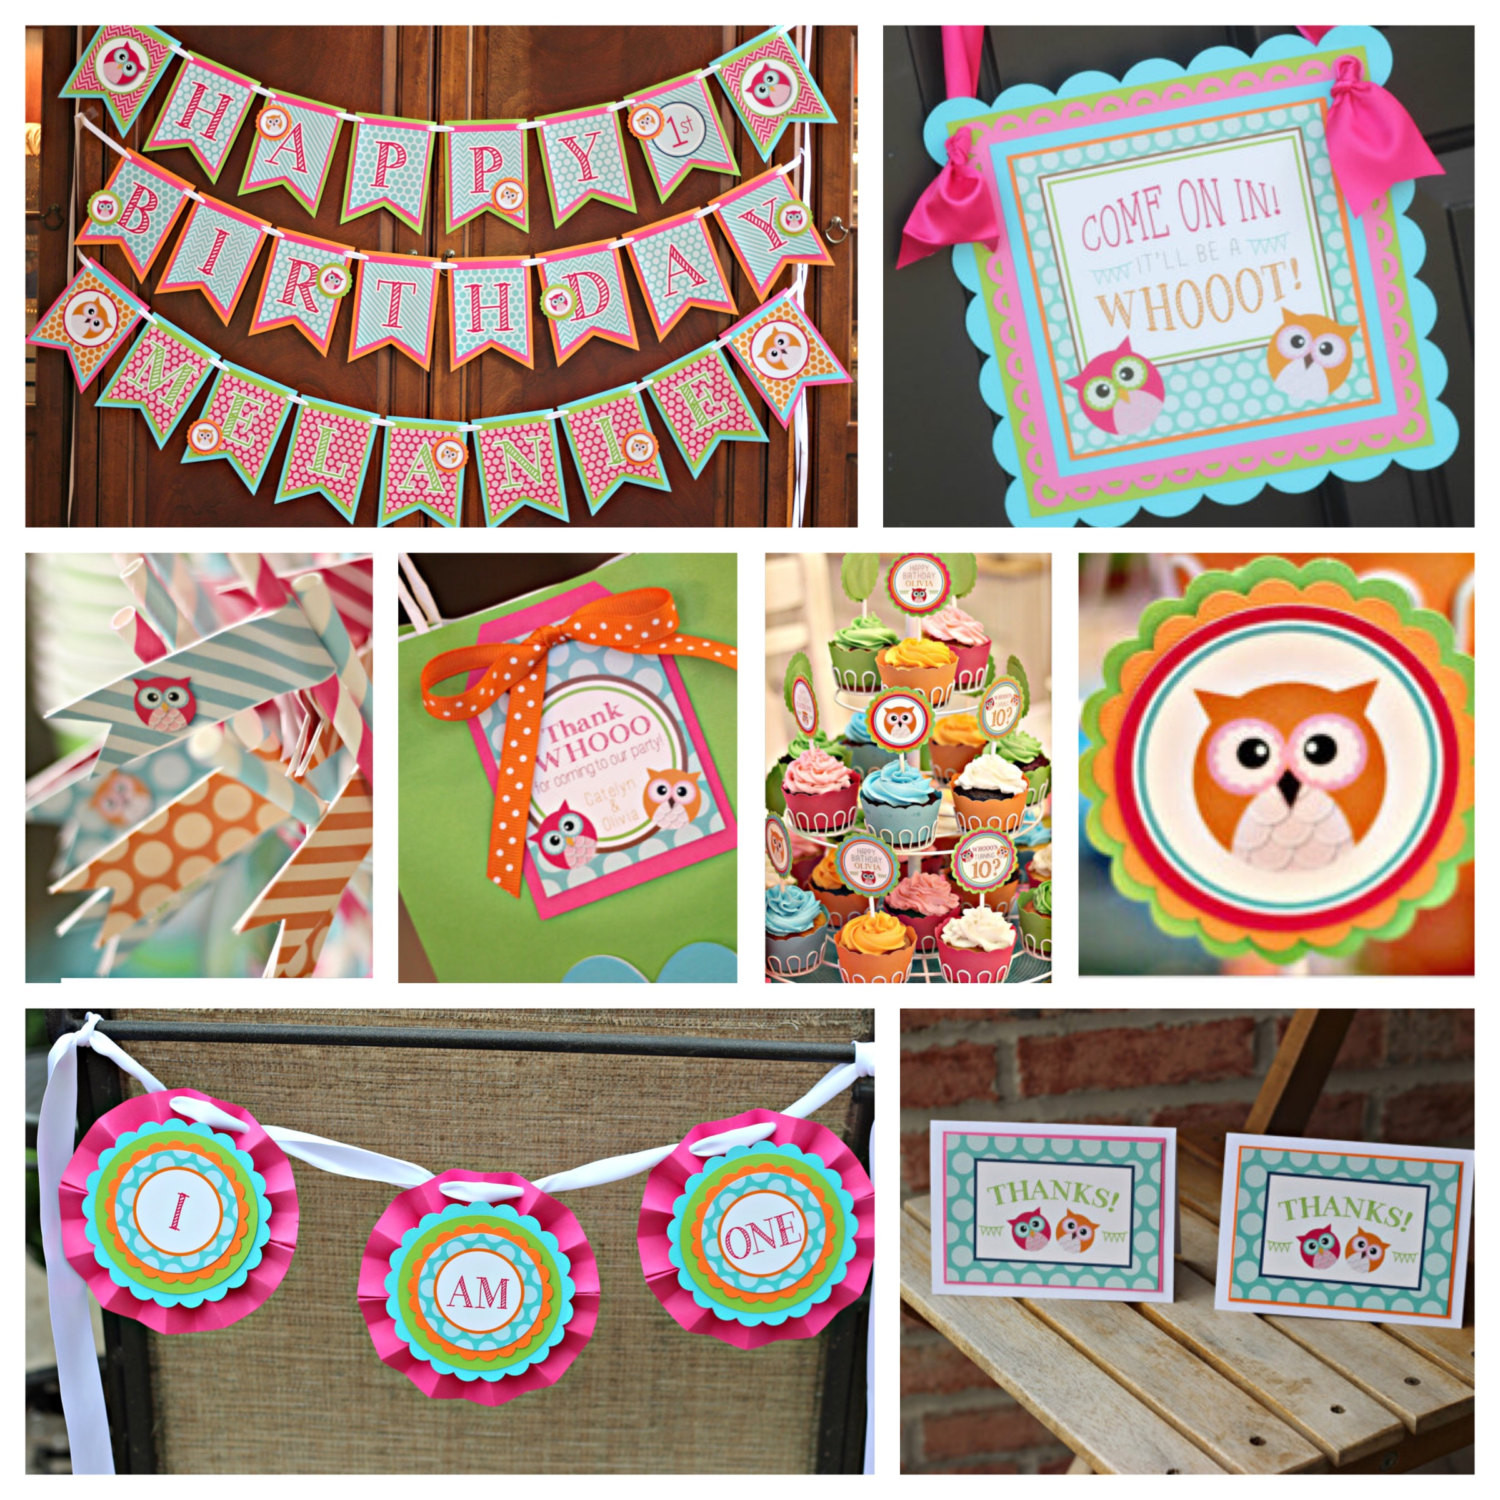 Owl First Birthday Decorations
 Owl First Birthday Party Decorations Boutique 7 piece party